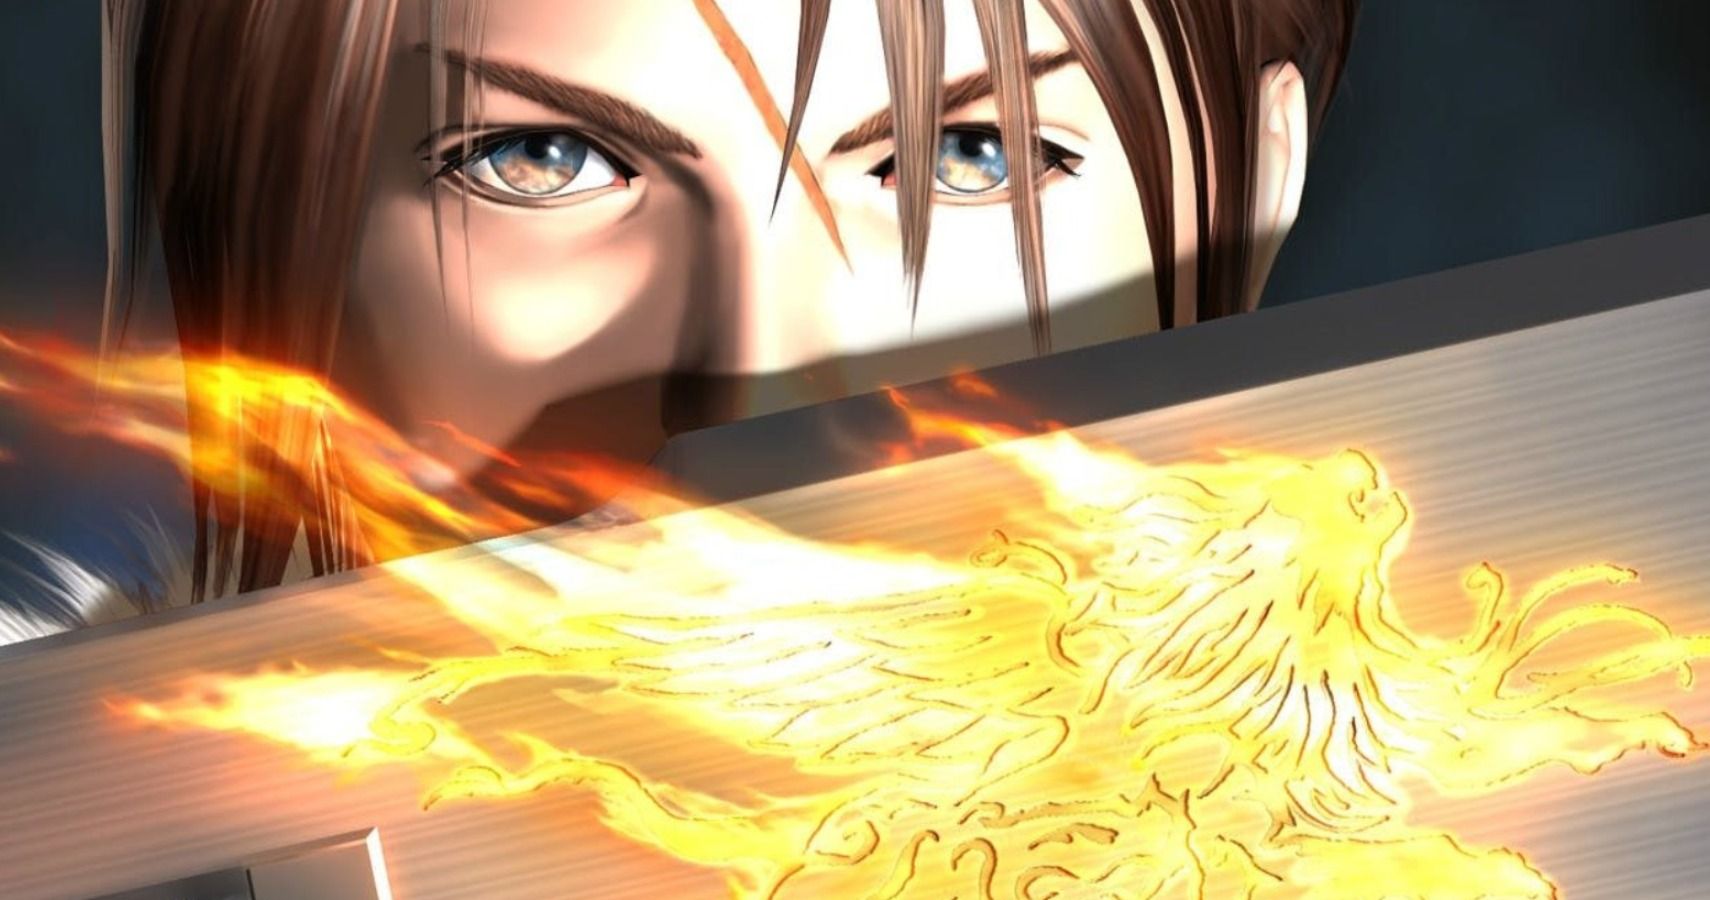 Director Of Final Fantasy VIII Wants Younger Staff Members At Square Enix To Remake The Game